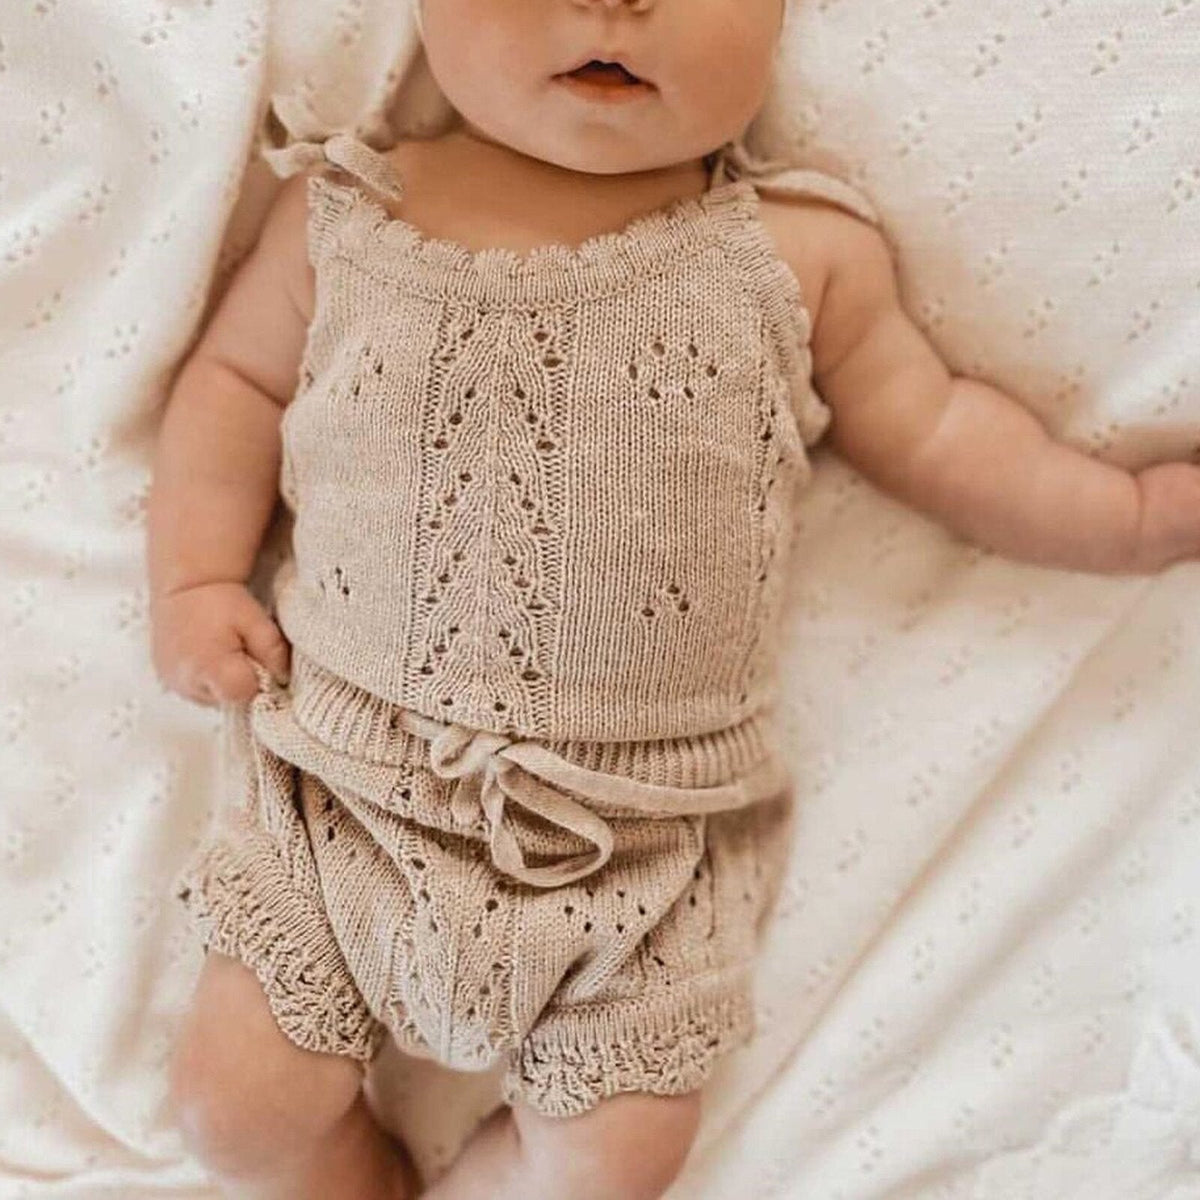 Knitted baby outfit